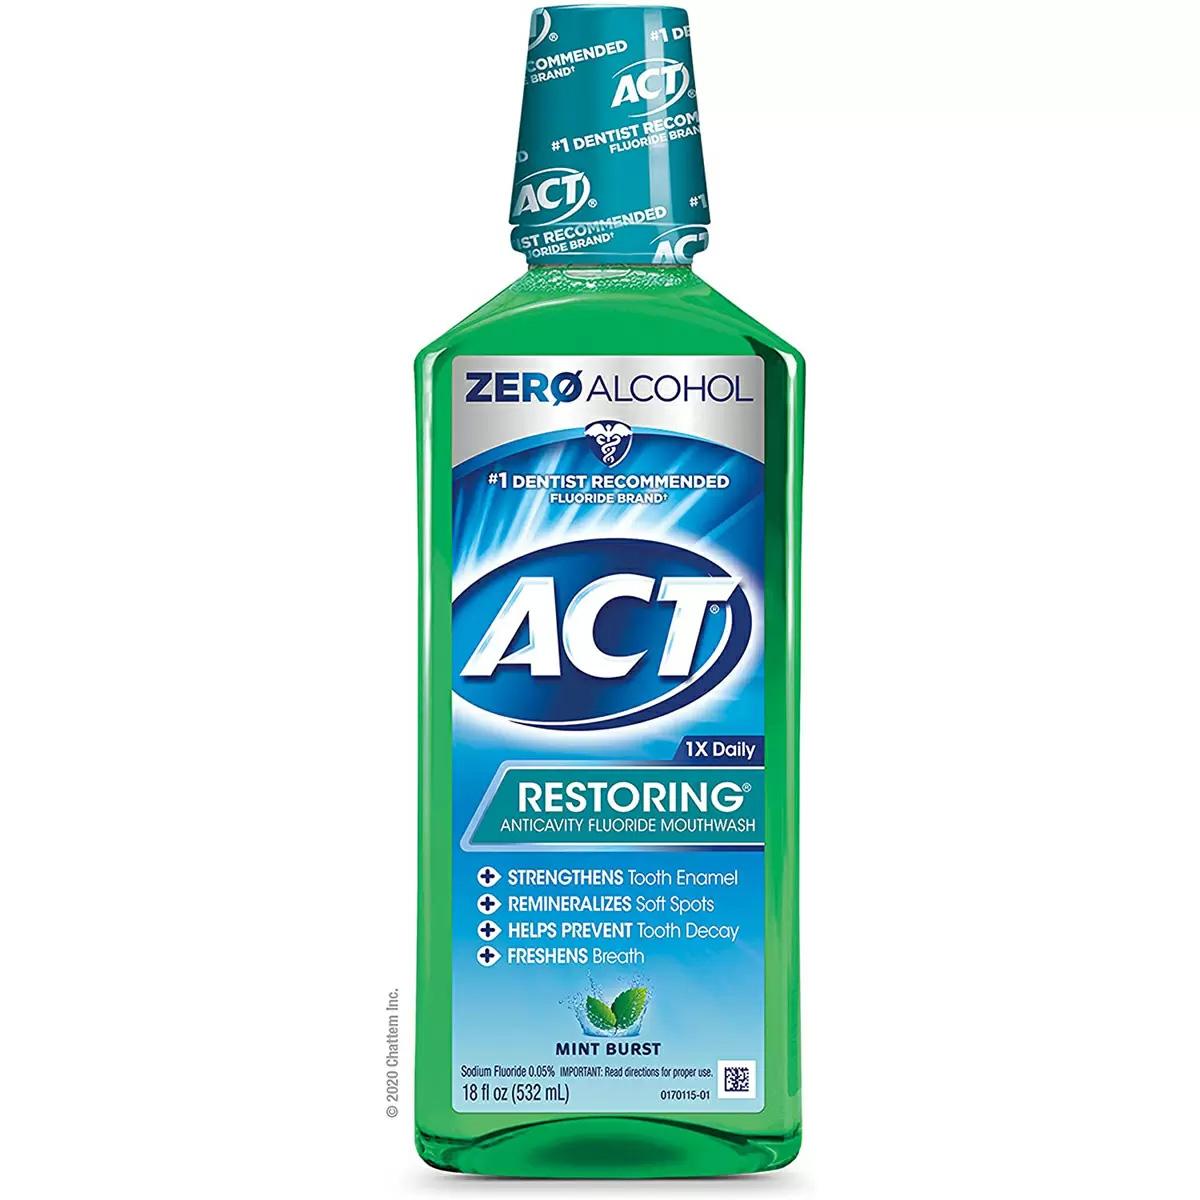 ACT Restoring Anticavity Fluoride Mint Burst Mouthwash for $2.59 Shipped